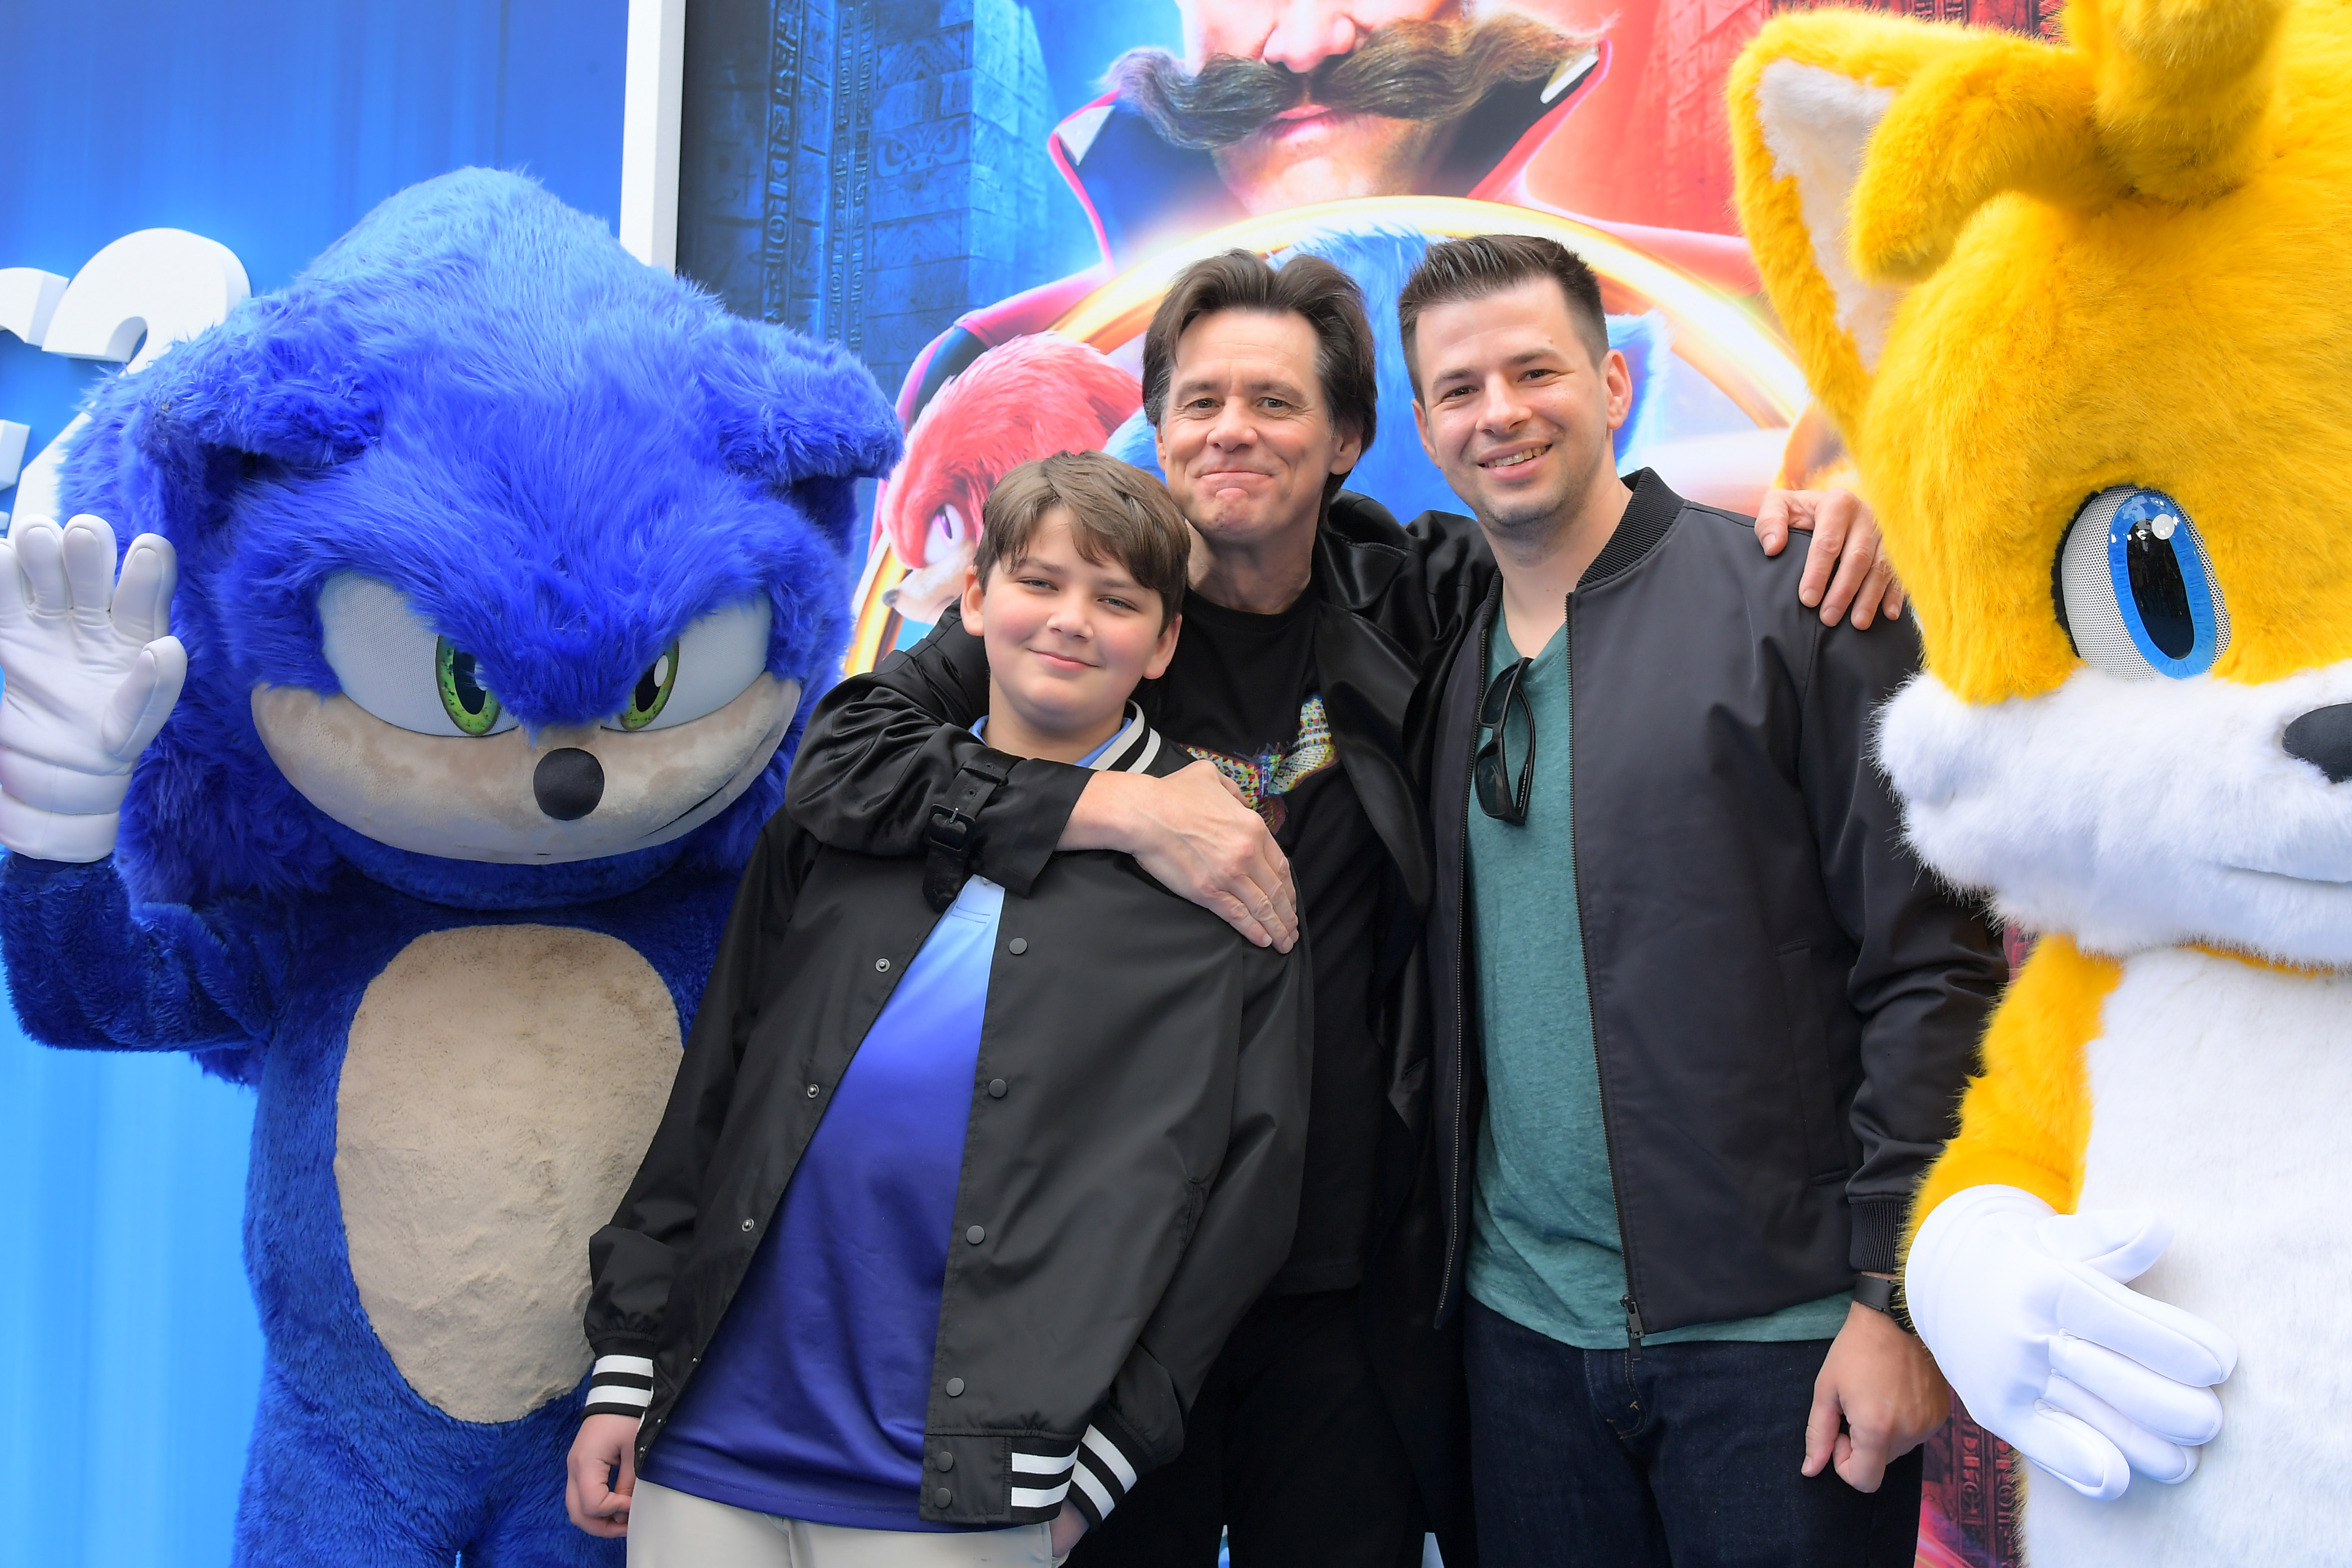 Jackson Riley Santana, Jim Carrey, and Chase Bordelon at the "Sonic the Hedgehog 2" Family Day in Los Angeles, California on April 2, 2022 | Source: Getty Images